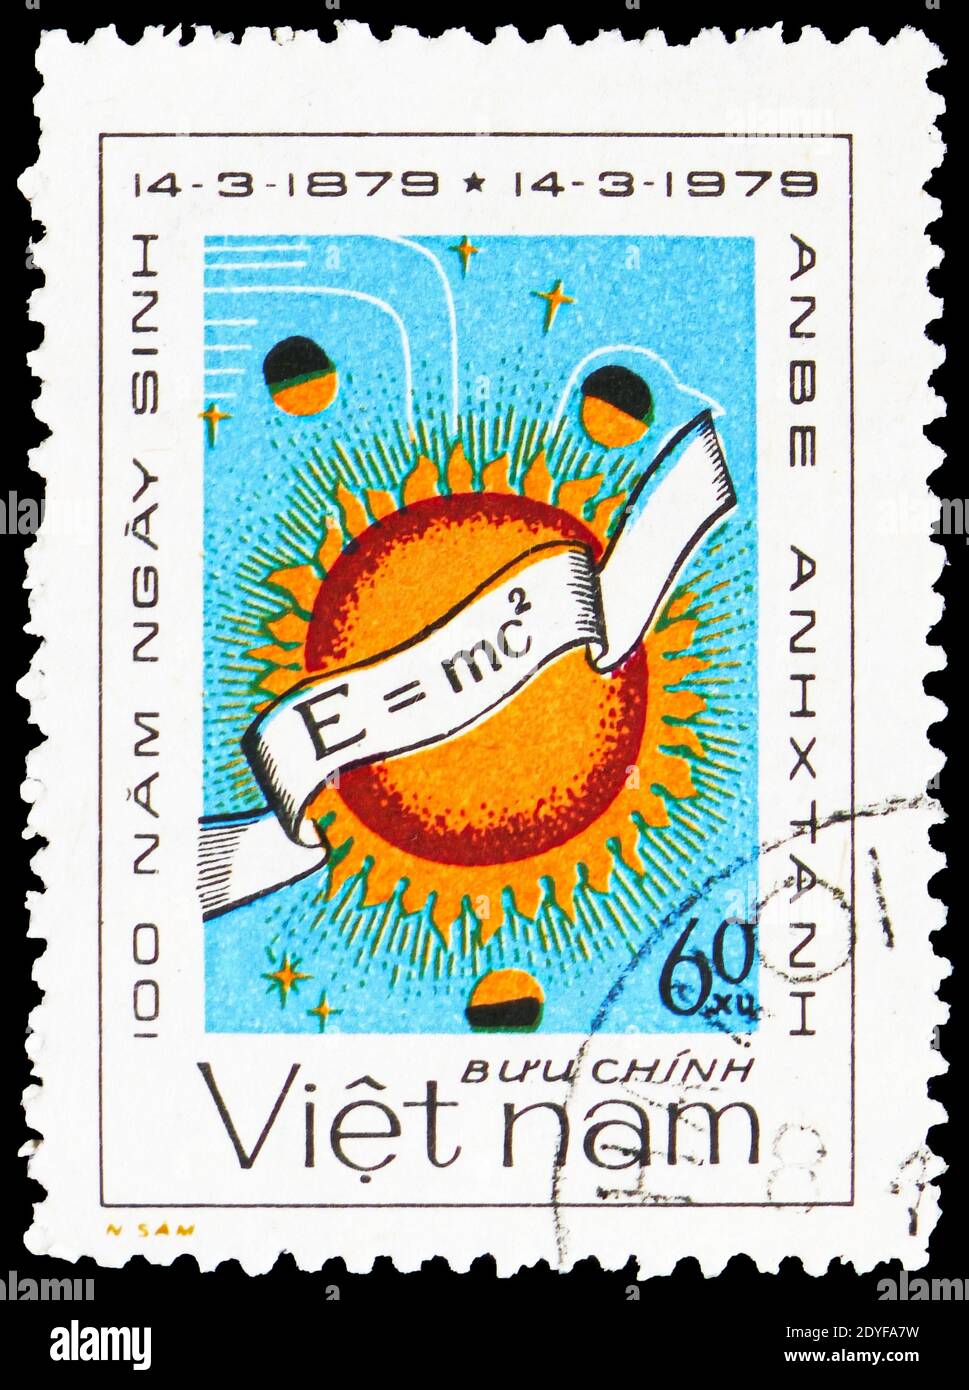 MOSCOW, RUSSIA - FEBRUARY 22, 2019: A stamp printed in Vietnam shows Equation, sun, planets, 100th anniversary of the birth of Albert Einstein (1879-1 Stock Photo